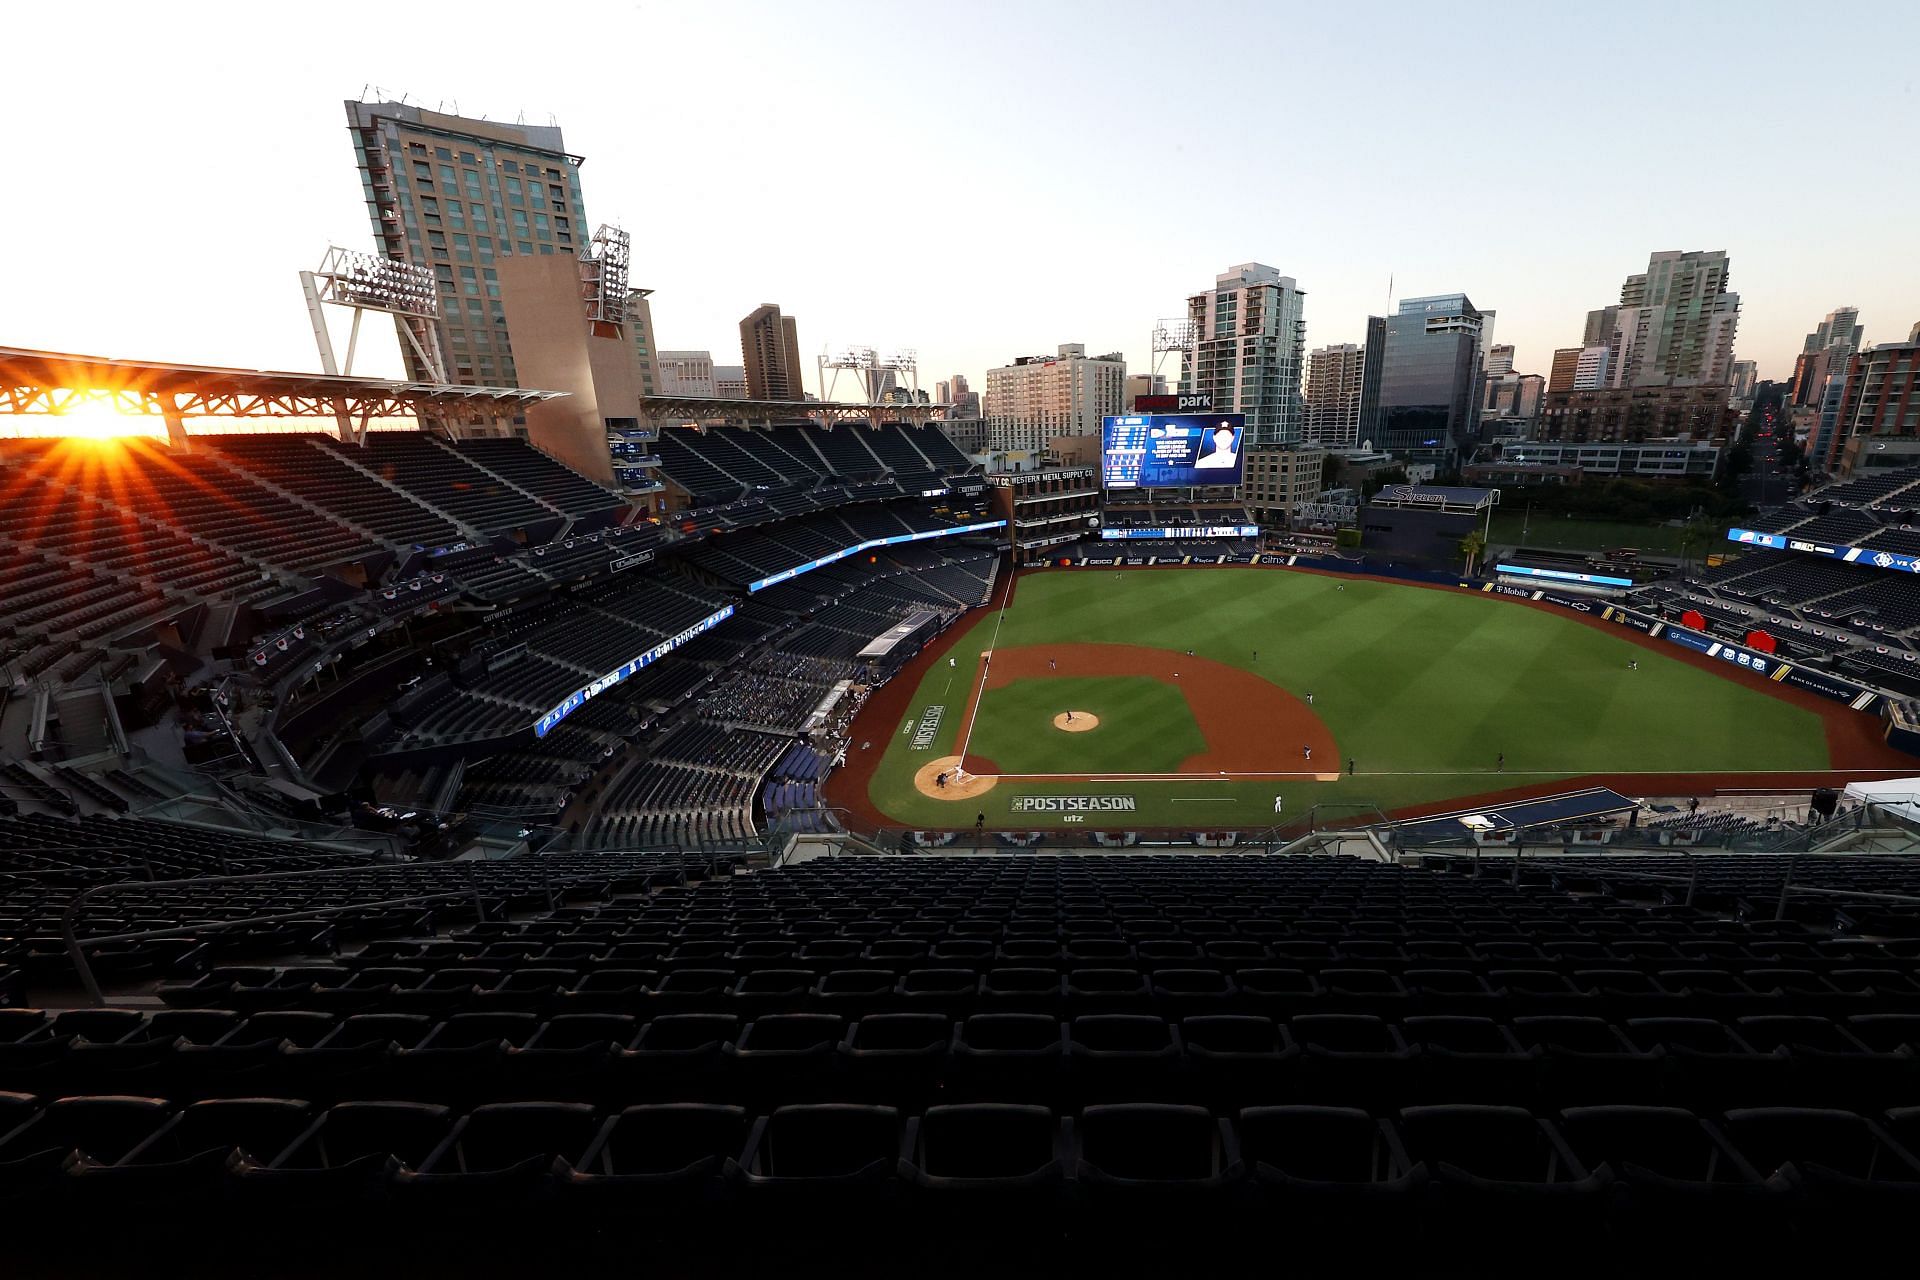 Petco Park is a modern stadium that uses technology but stays true to the spirit of baseball